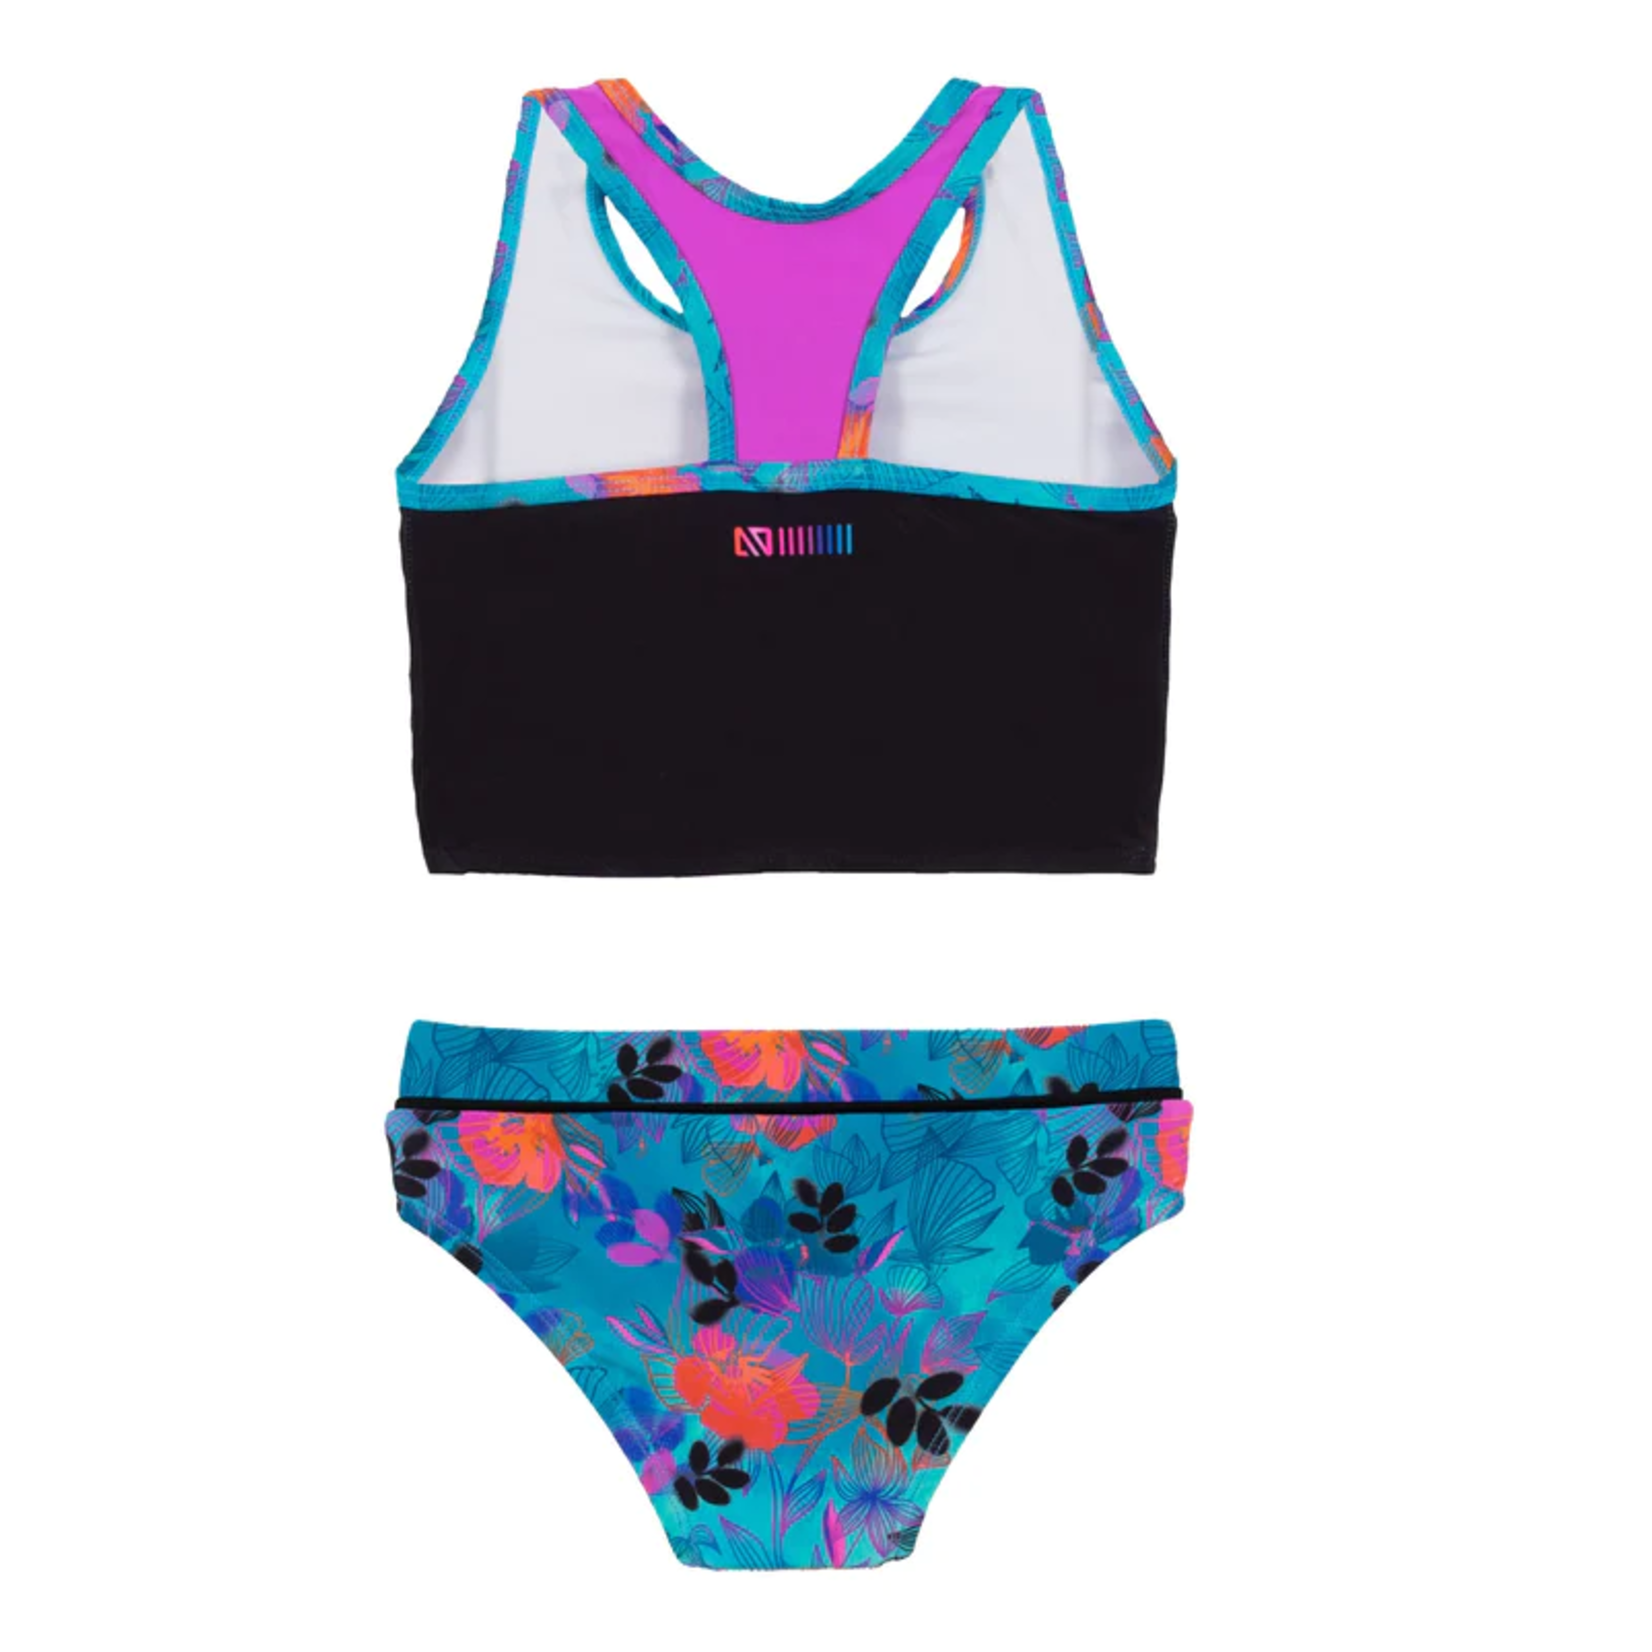 Nanö NANÖ - Navy blue two-piece swimsuit with colorful flower print